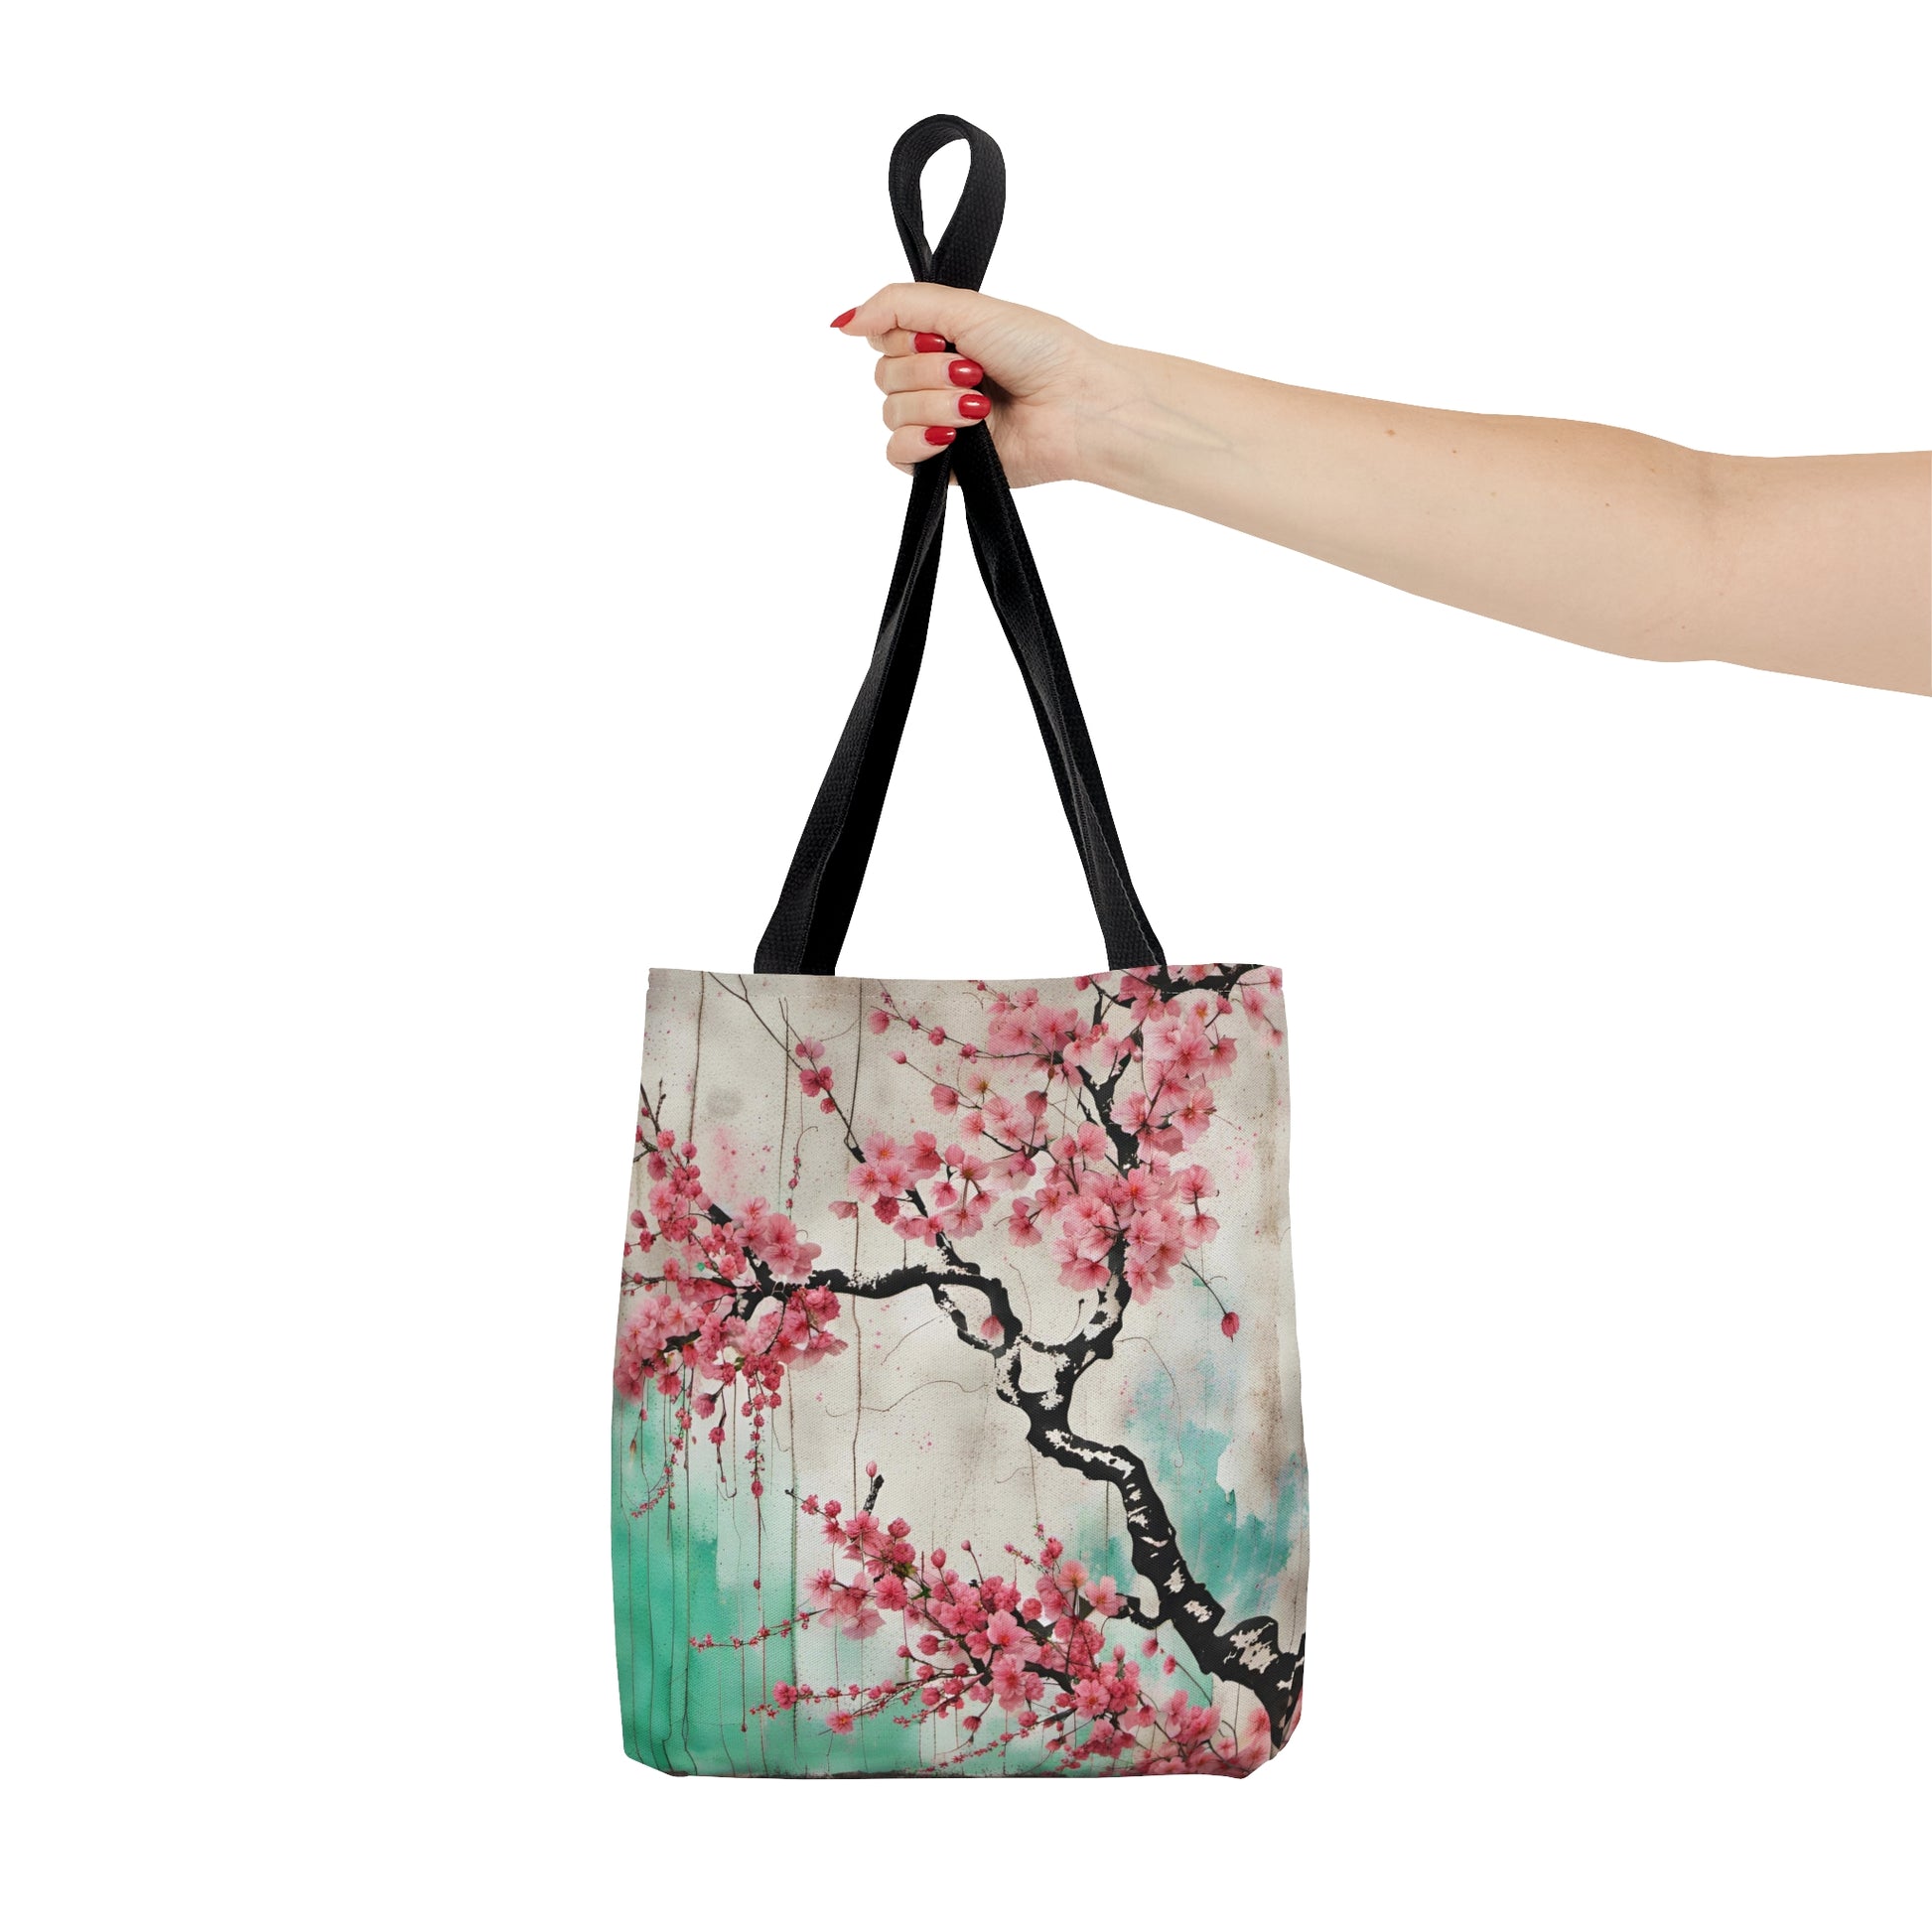 Floral Themed Bags and Travel Accessories - Street Style Cherry Blossoms Printed on Tote Bag small held